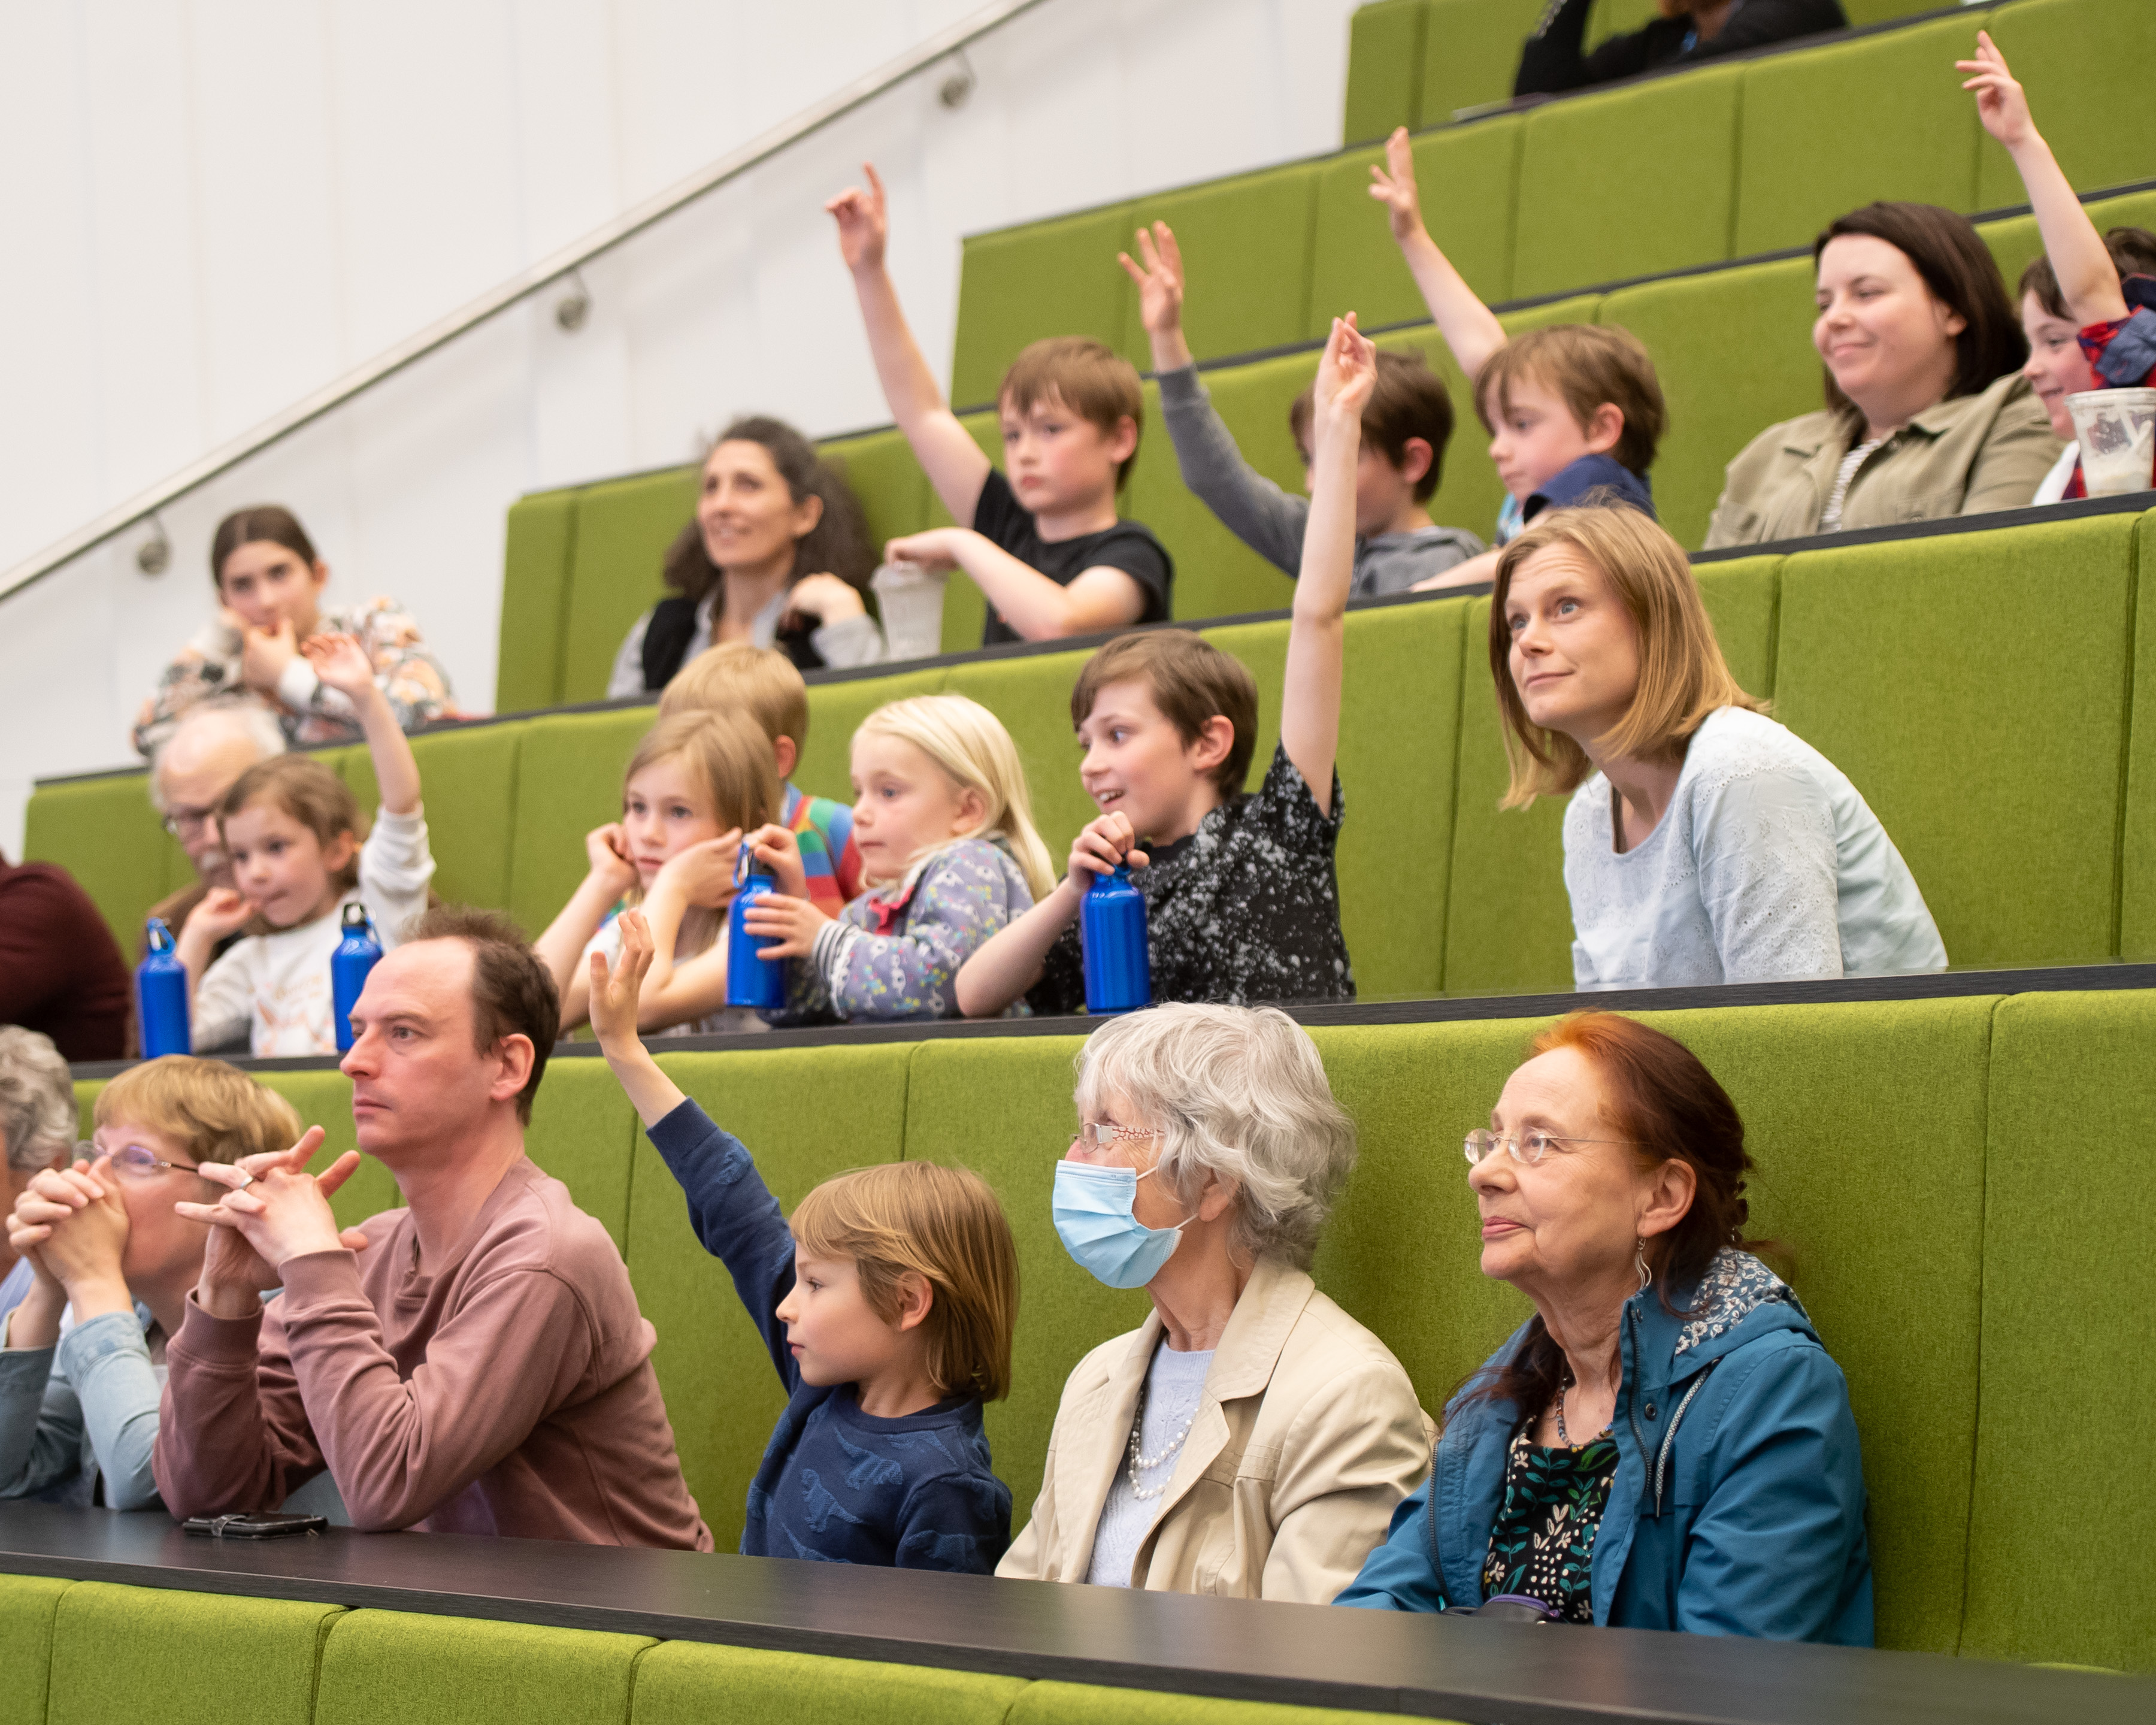 An audience of children raise their hands to answer a question